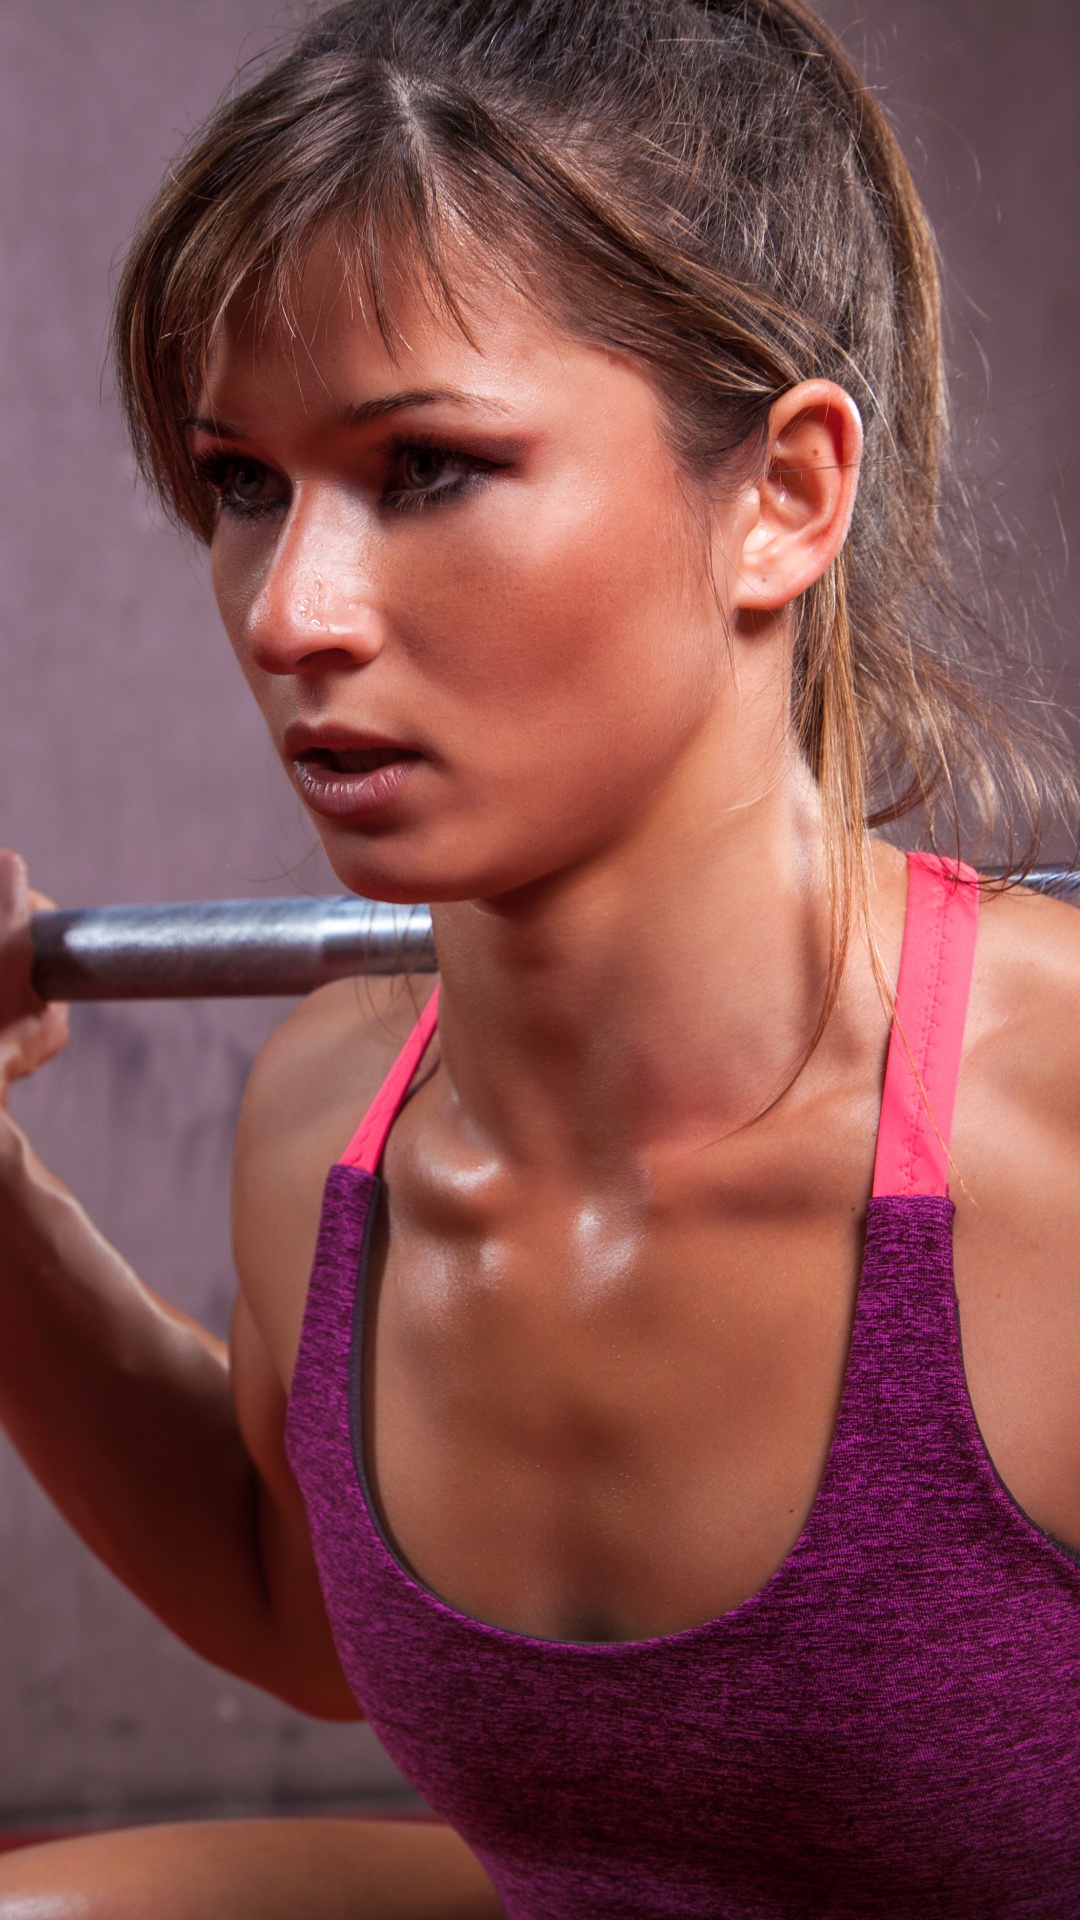 Woman in Pink Tank Top Holding Barbell. Wallpaper in 1080x1920 Resolution